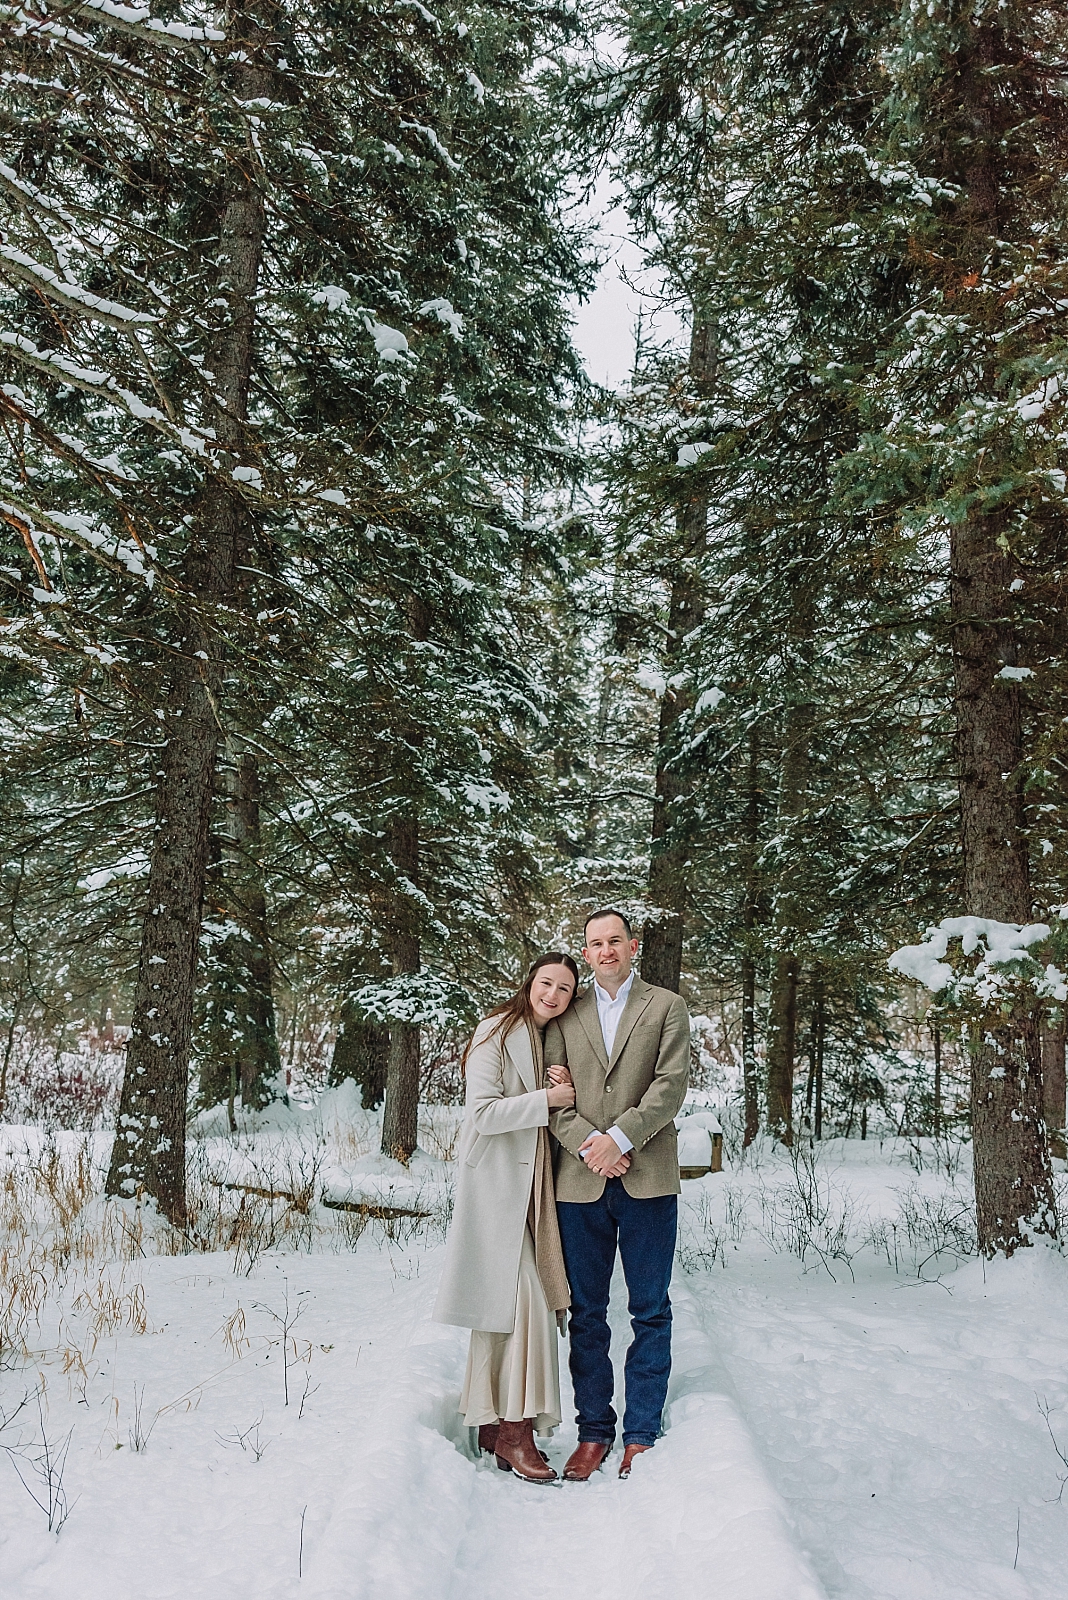 winter wedding photography in the national forest, jackson hole wedding photography